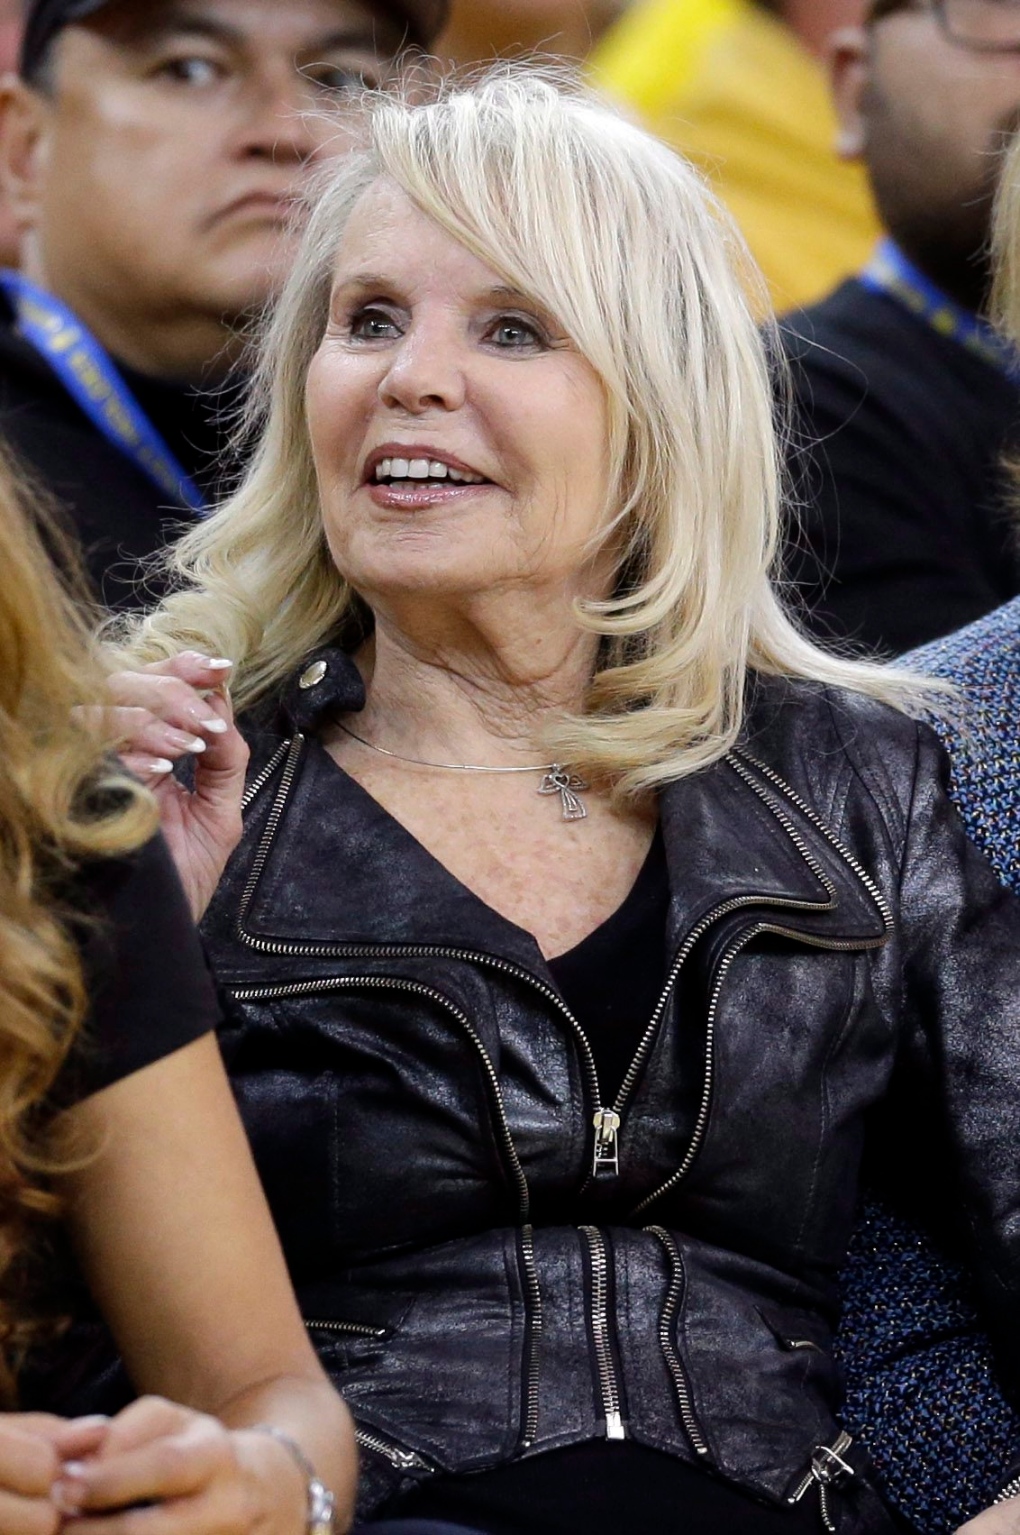 Shelley Sterling, wife of Clippers owner Donald